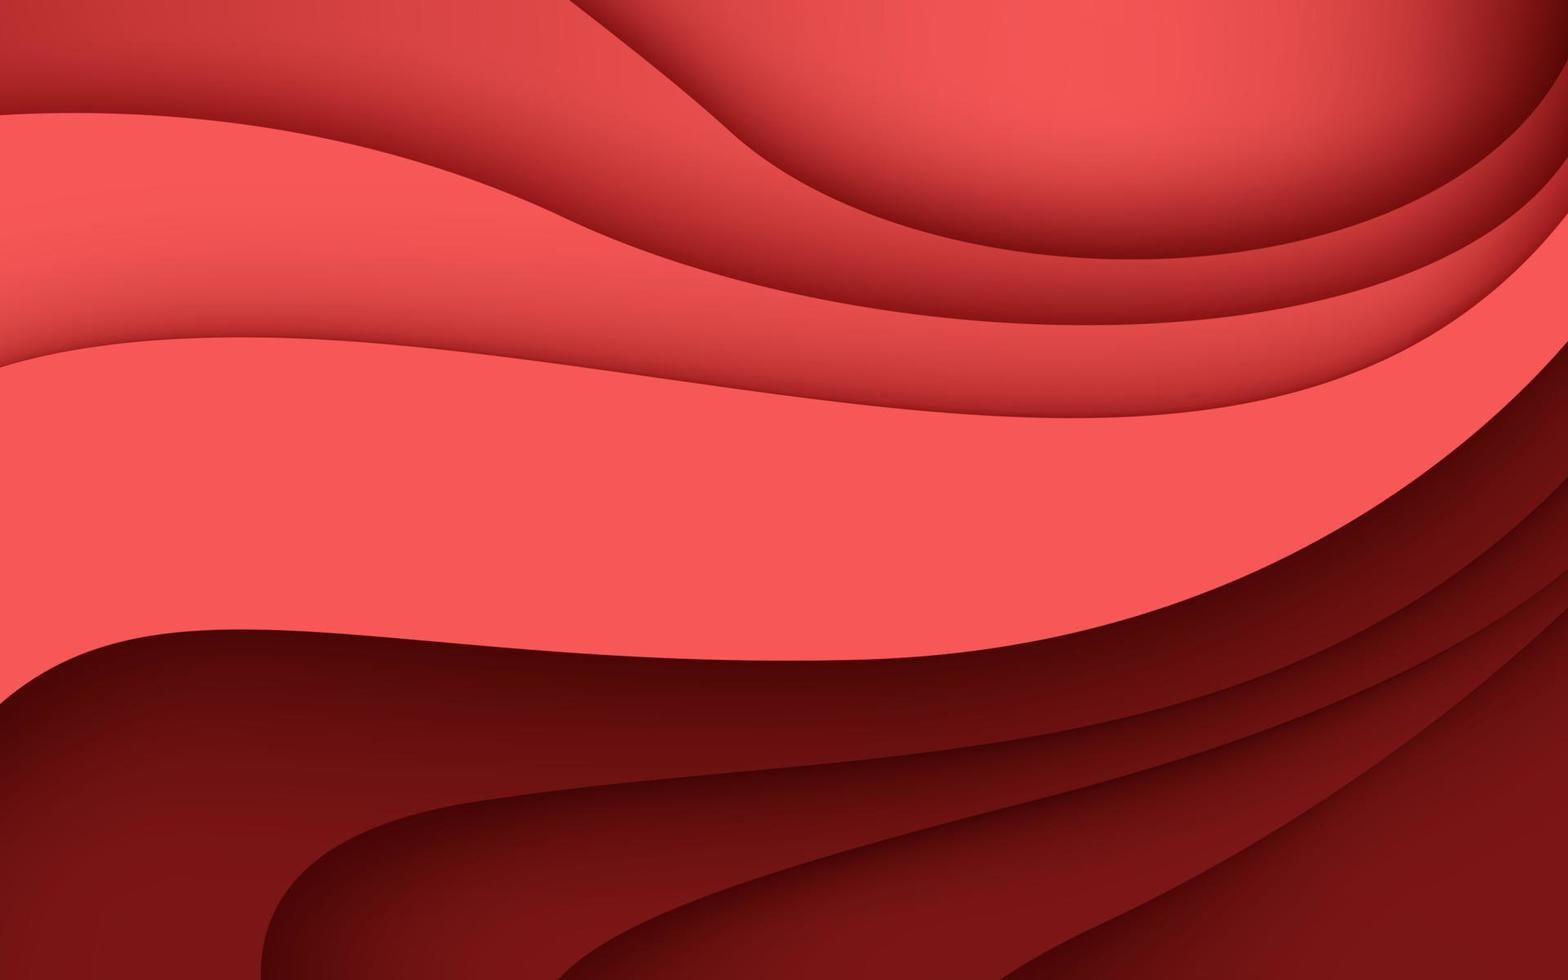 Multi layers red texture 3D papercut layers in gradient vector banner. Abstract paper cut art background design for website template. Topography map concept or smooth origami paper cut